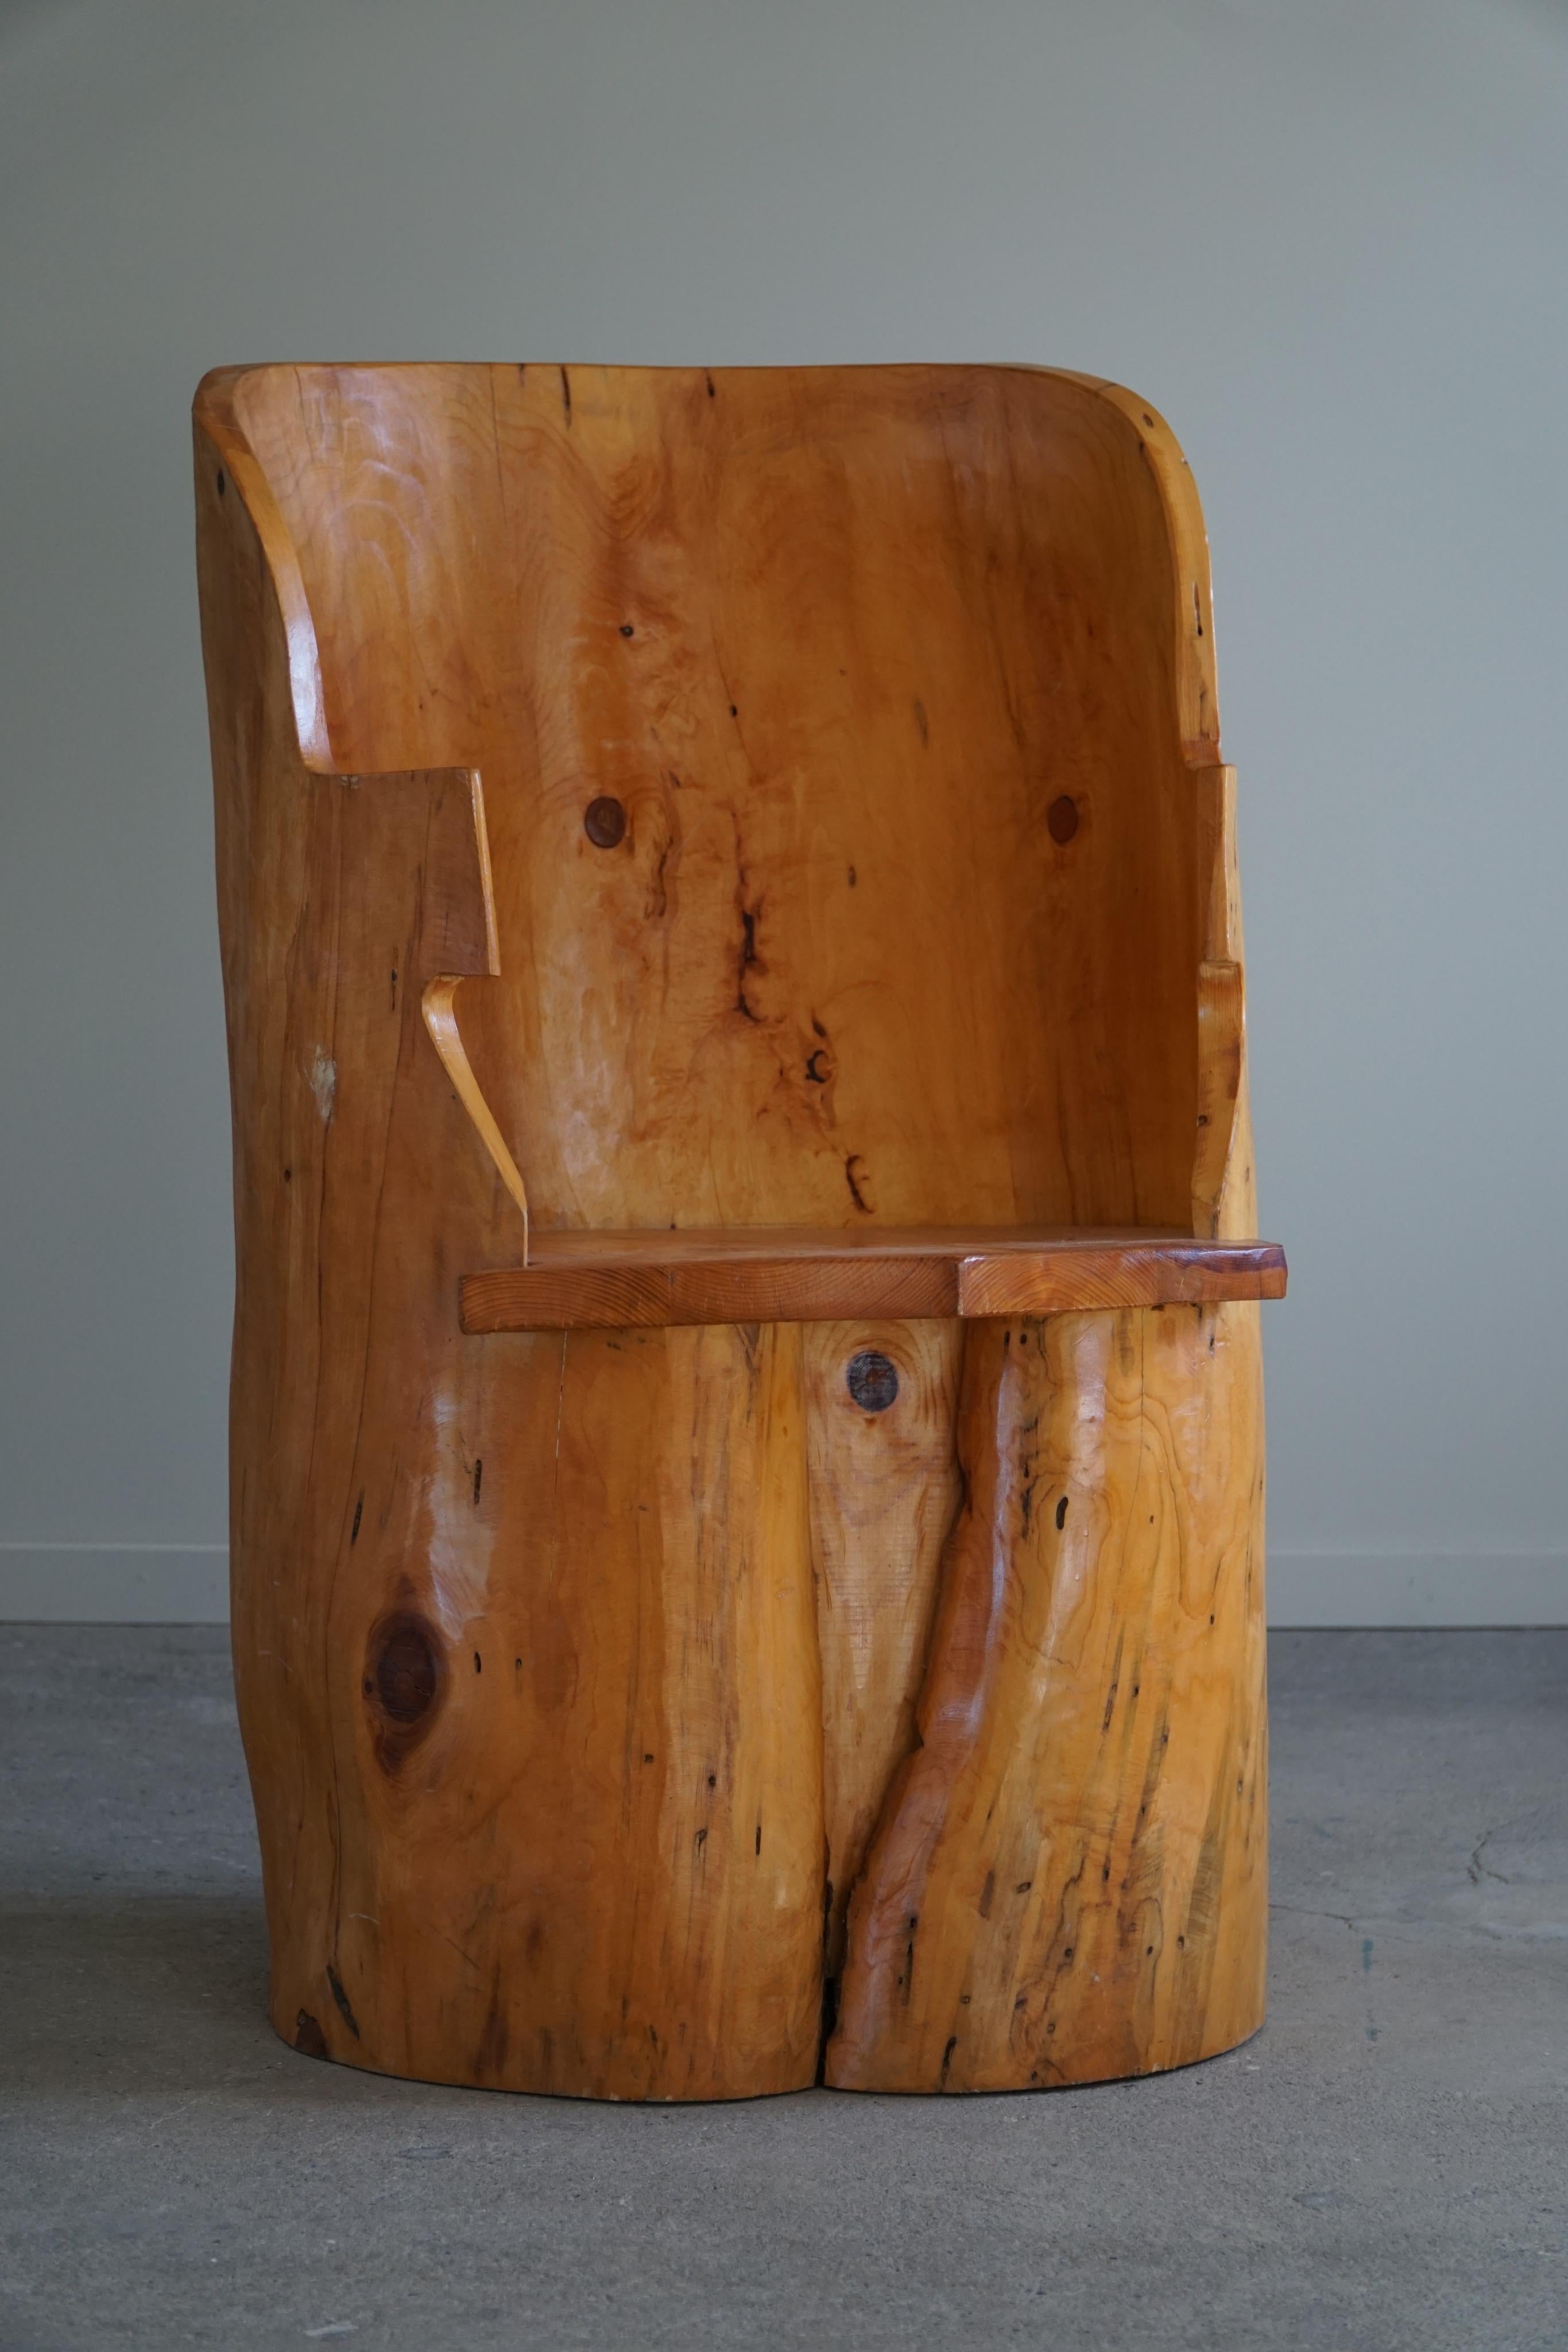 Stump Chair in Solid Birch by a Swedish Cabinetmaker, Wabi Sabi, 1950s For Sale 14